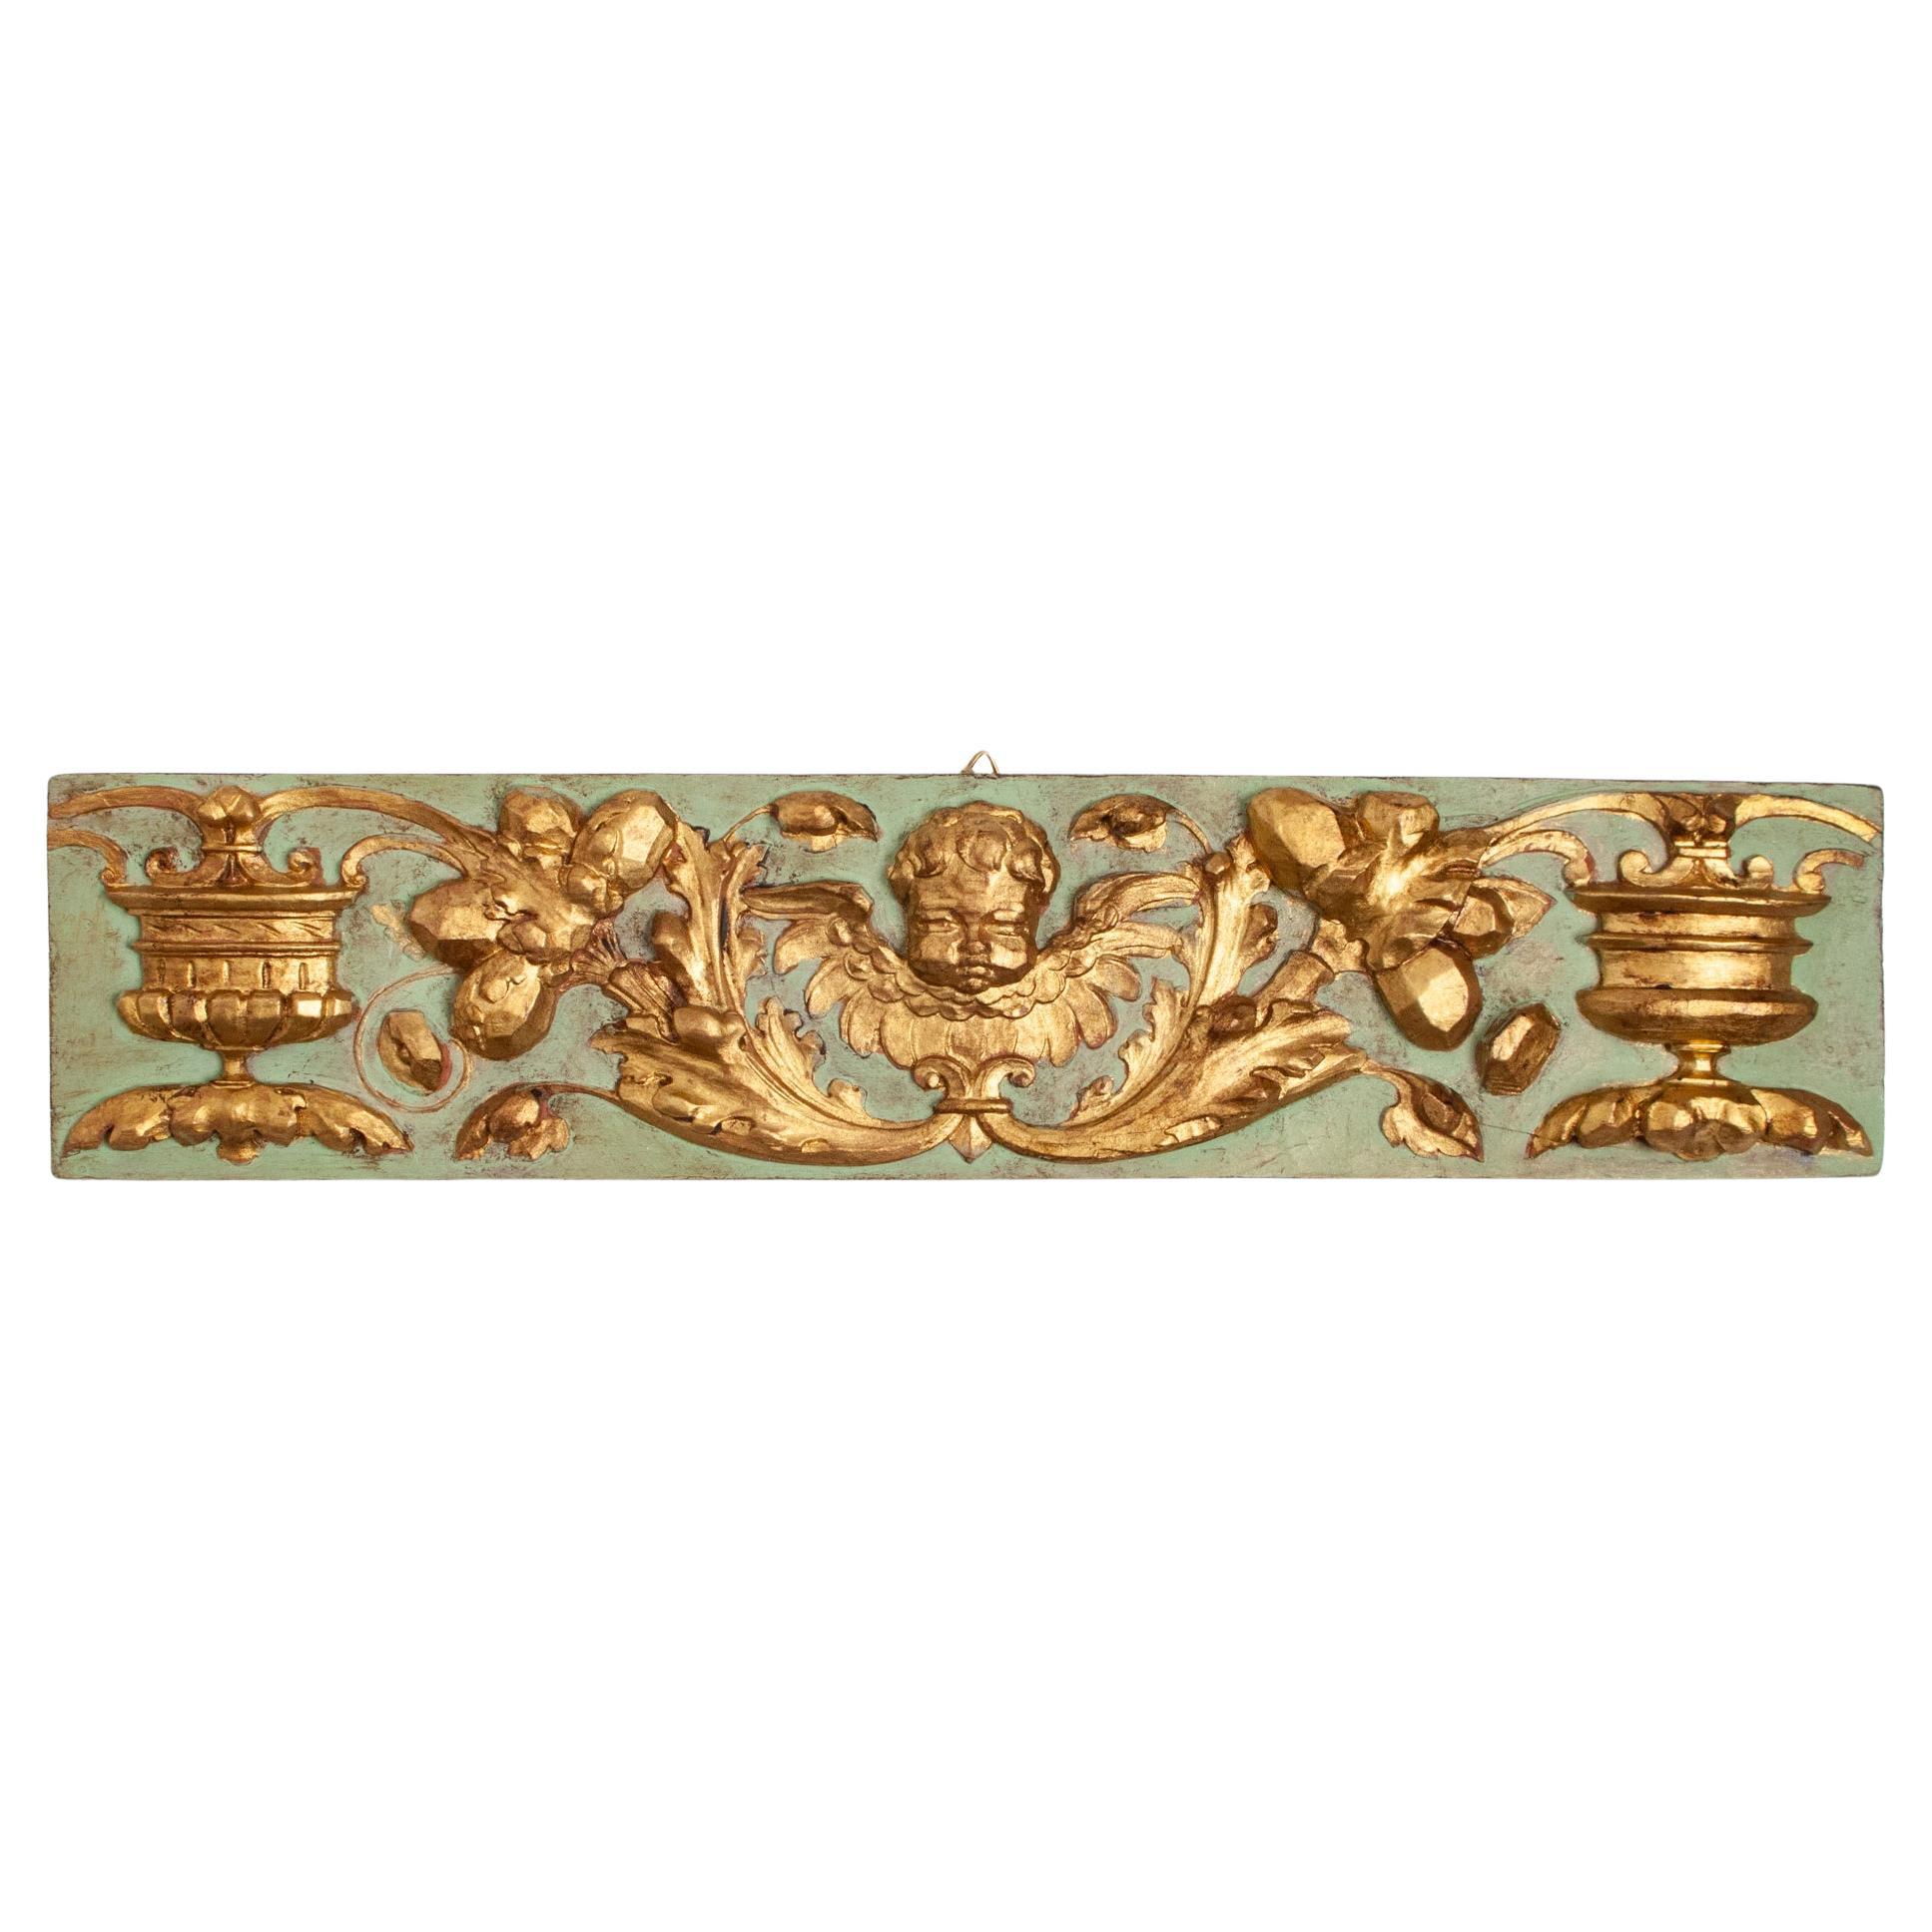 Small Antique Frieze with Little Angel